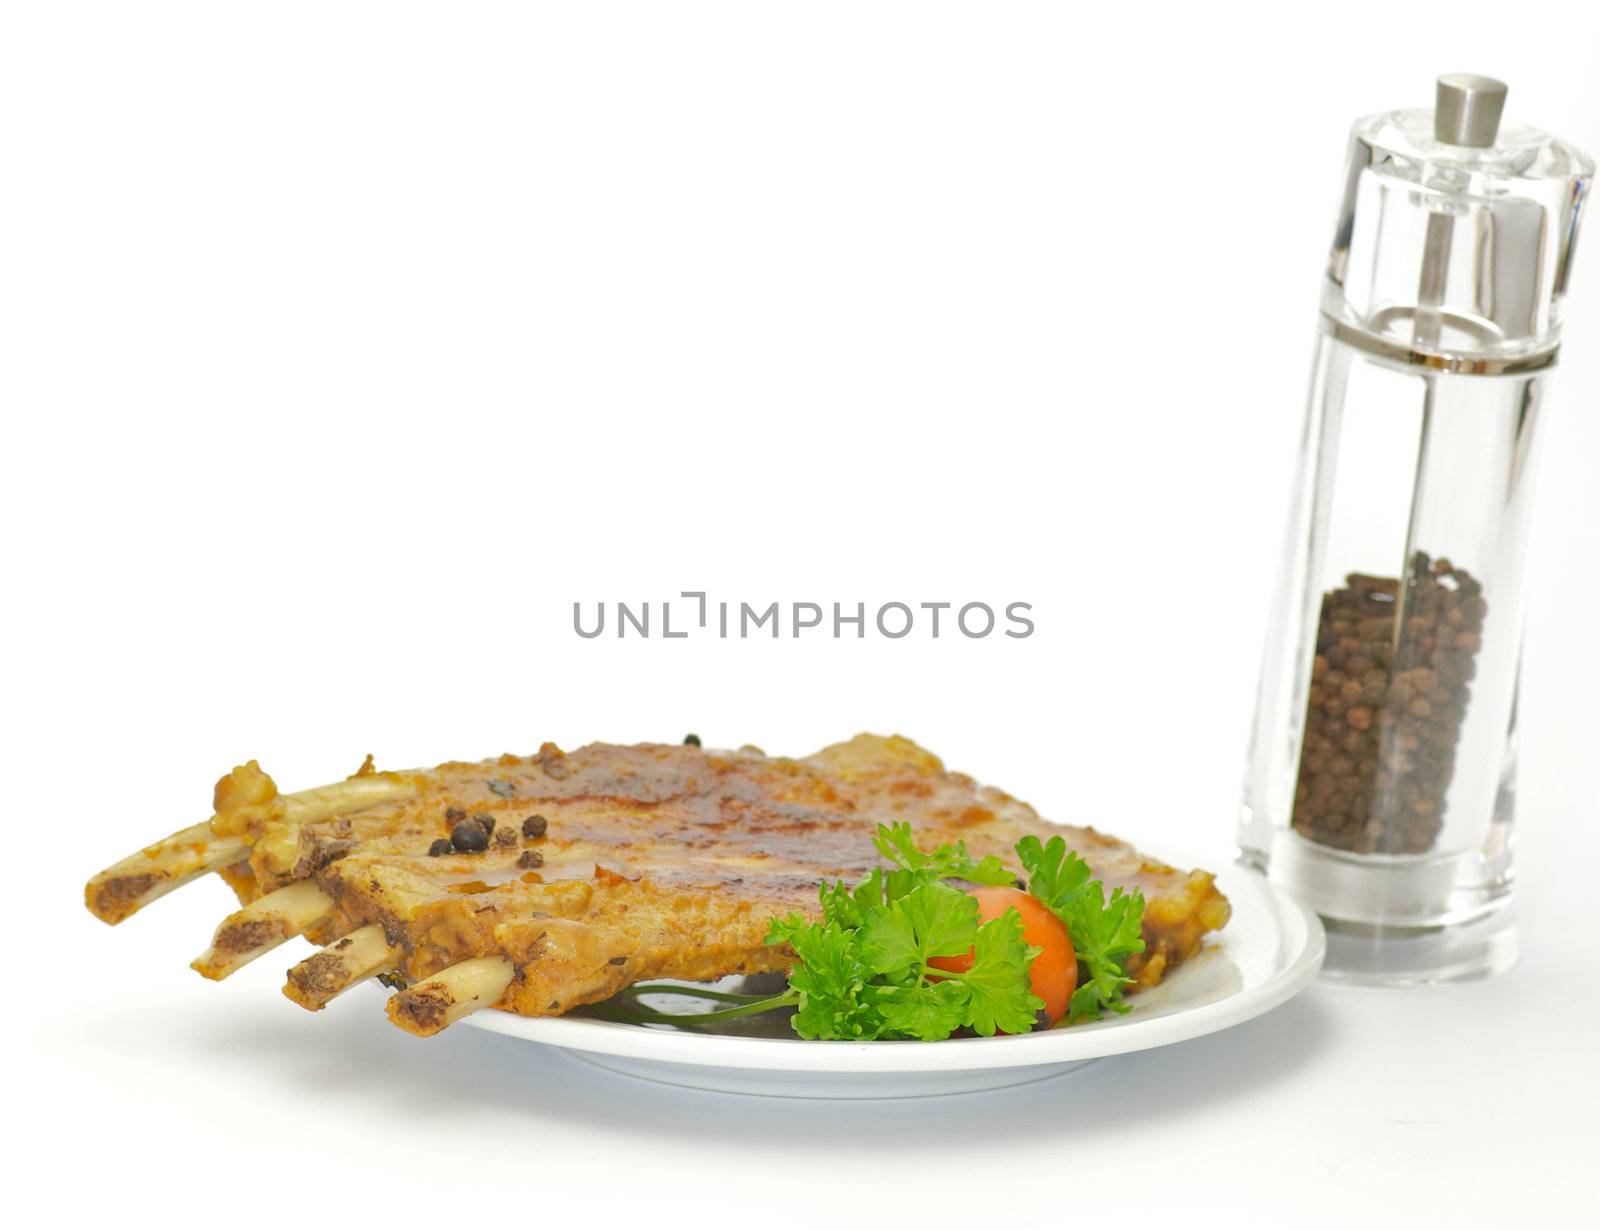 Barbecued pork ribs on white plate isolated on white background